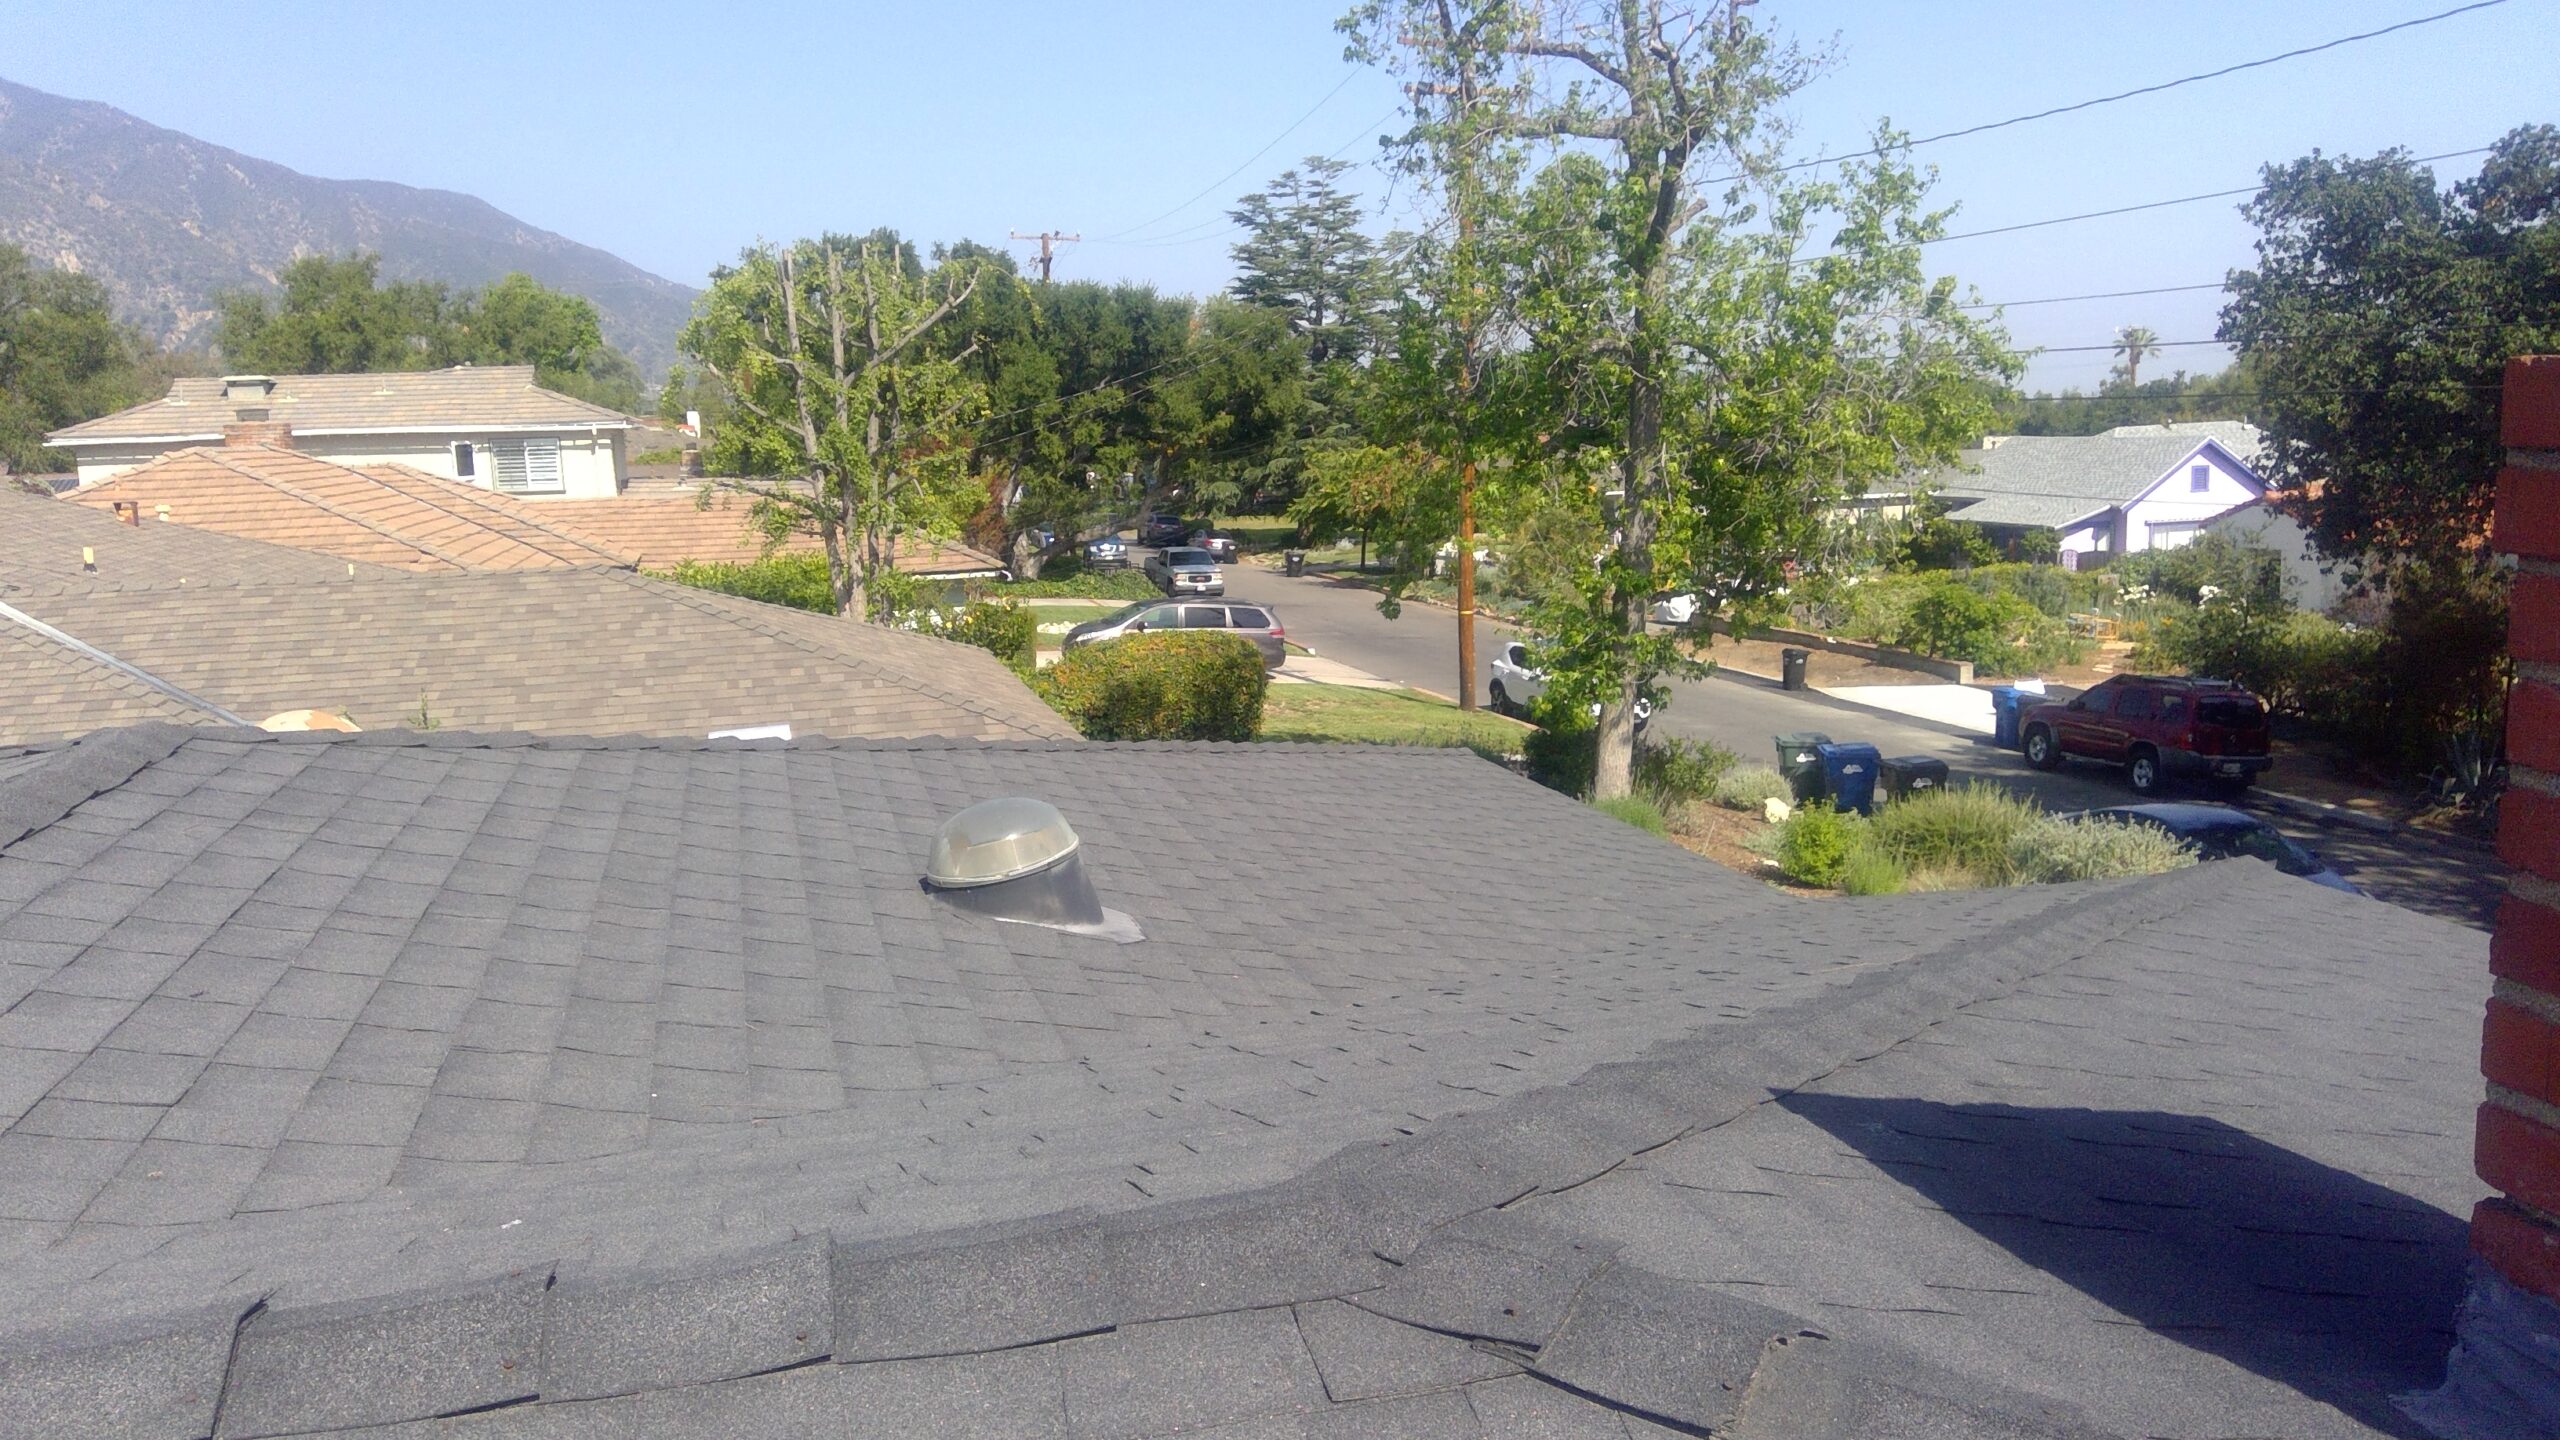 Roof top looking toward mountains